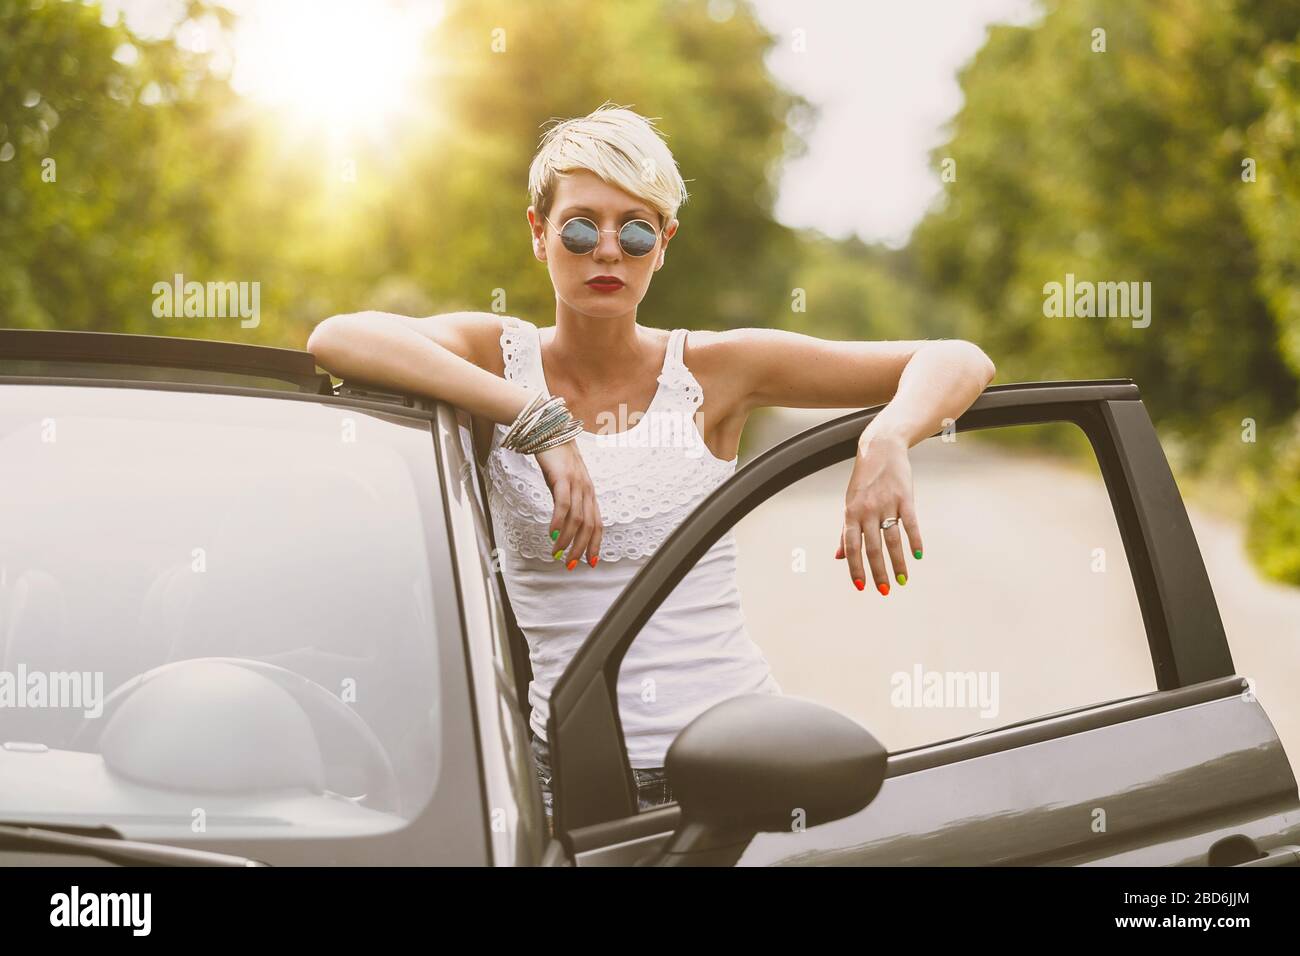 Young blonde attractive woman is ready to enter in her car. She is opening the door and staying behind it. Stock Photo